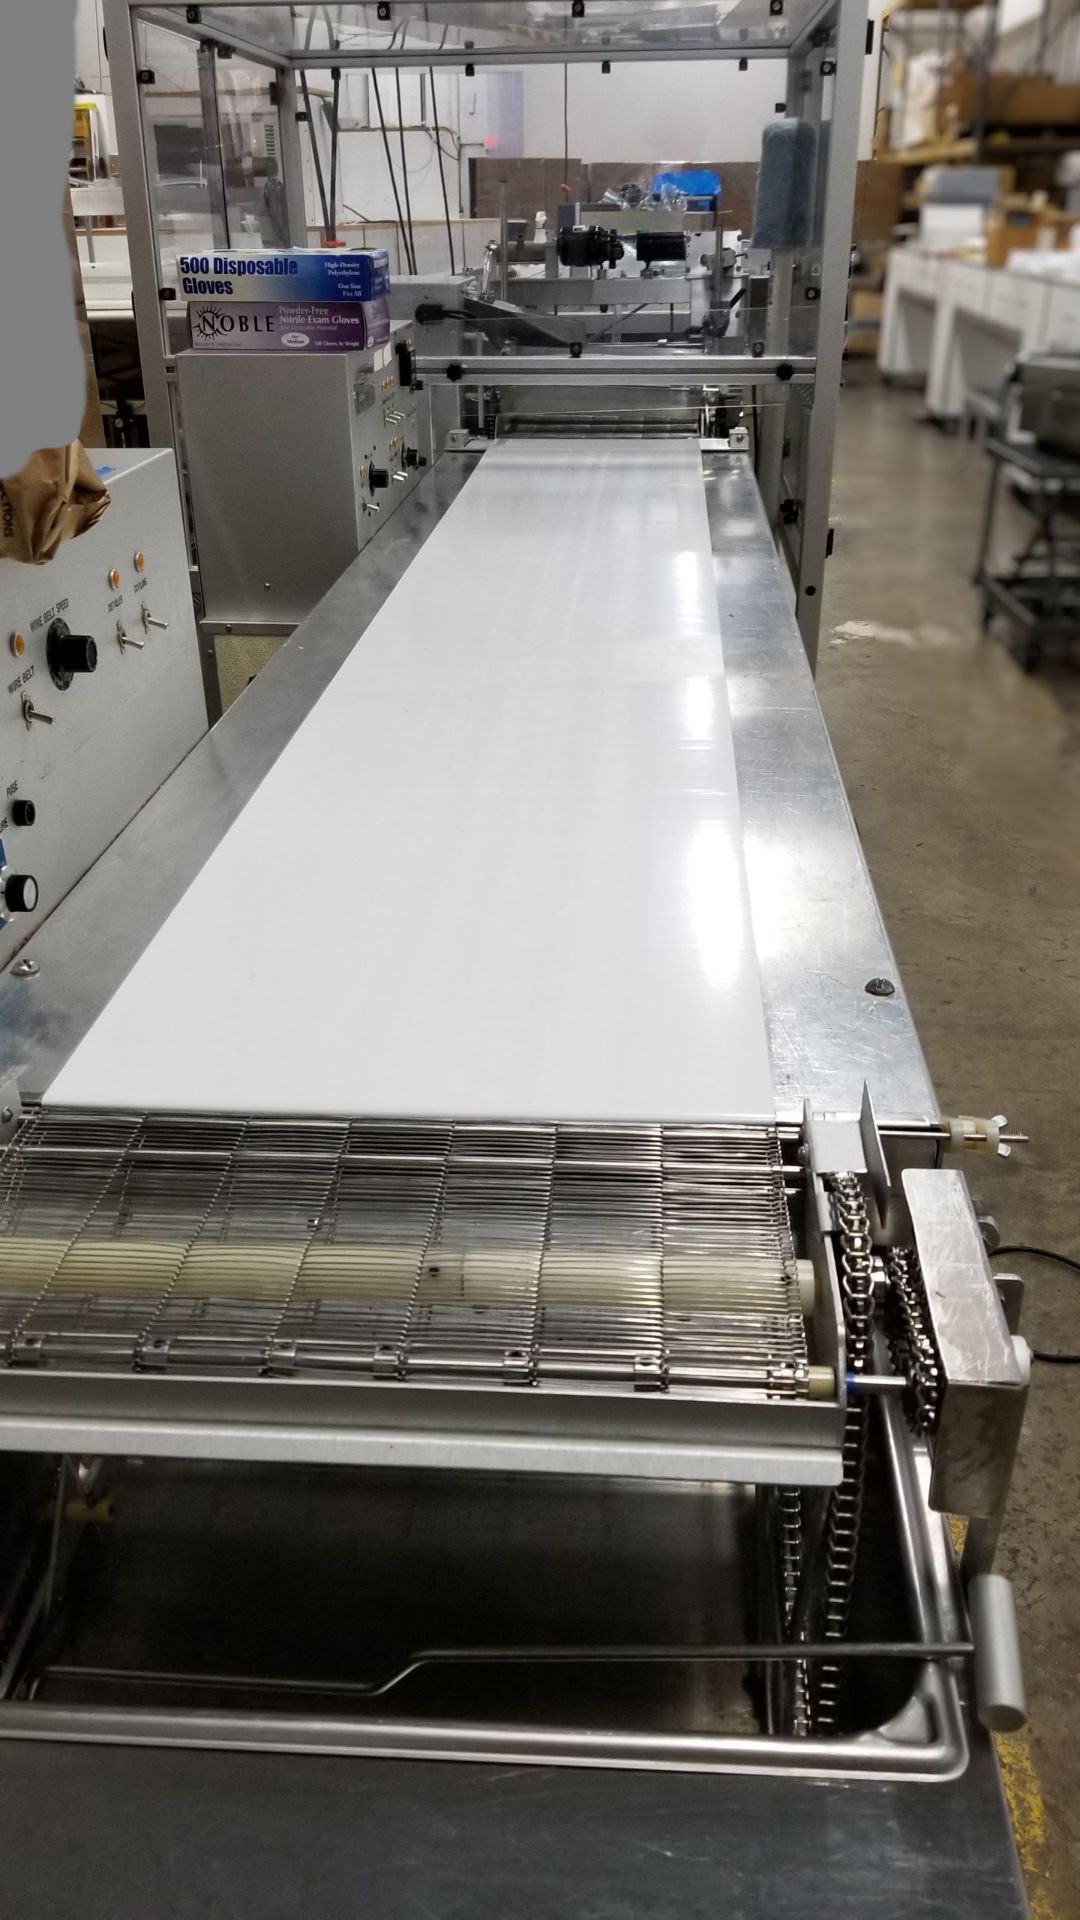 Hilliard 16" Enrobing Line with pre-bottomer, 8-ft Cold plate conveyor with AC unit, Enrober with - Image 7 of 9